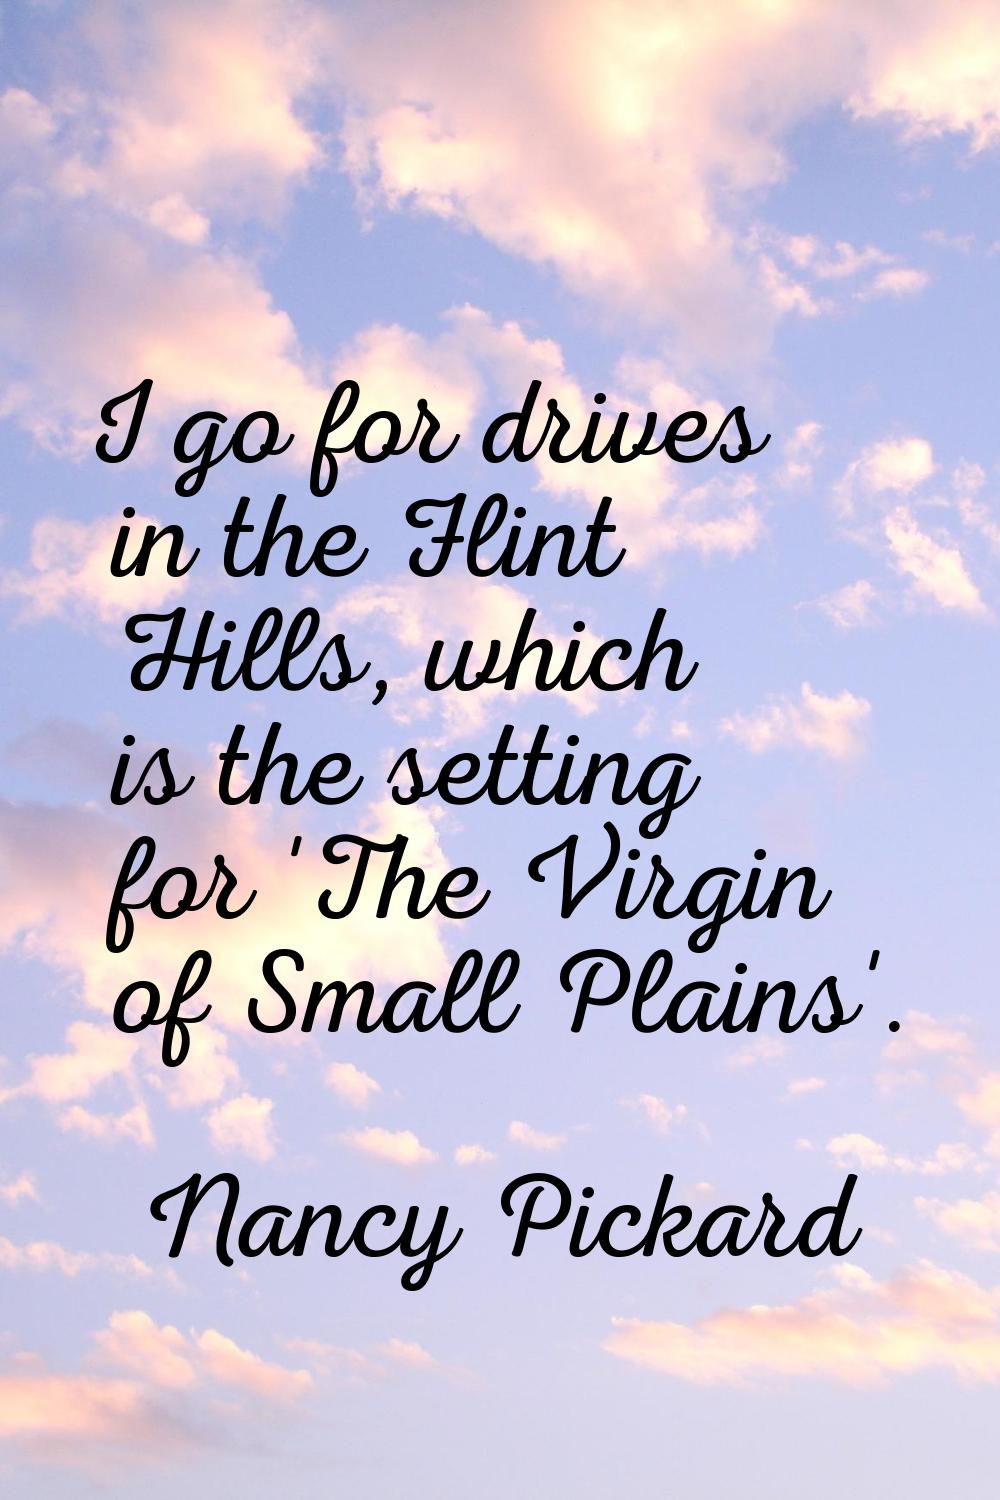 I go for drives in the Flint Hills, which is the setting for 'The Virgin of Small Plains'.